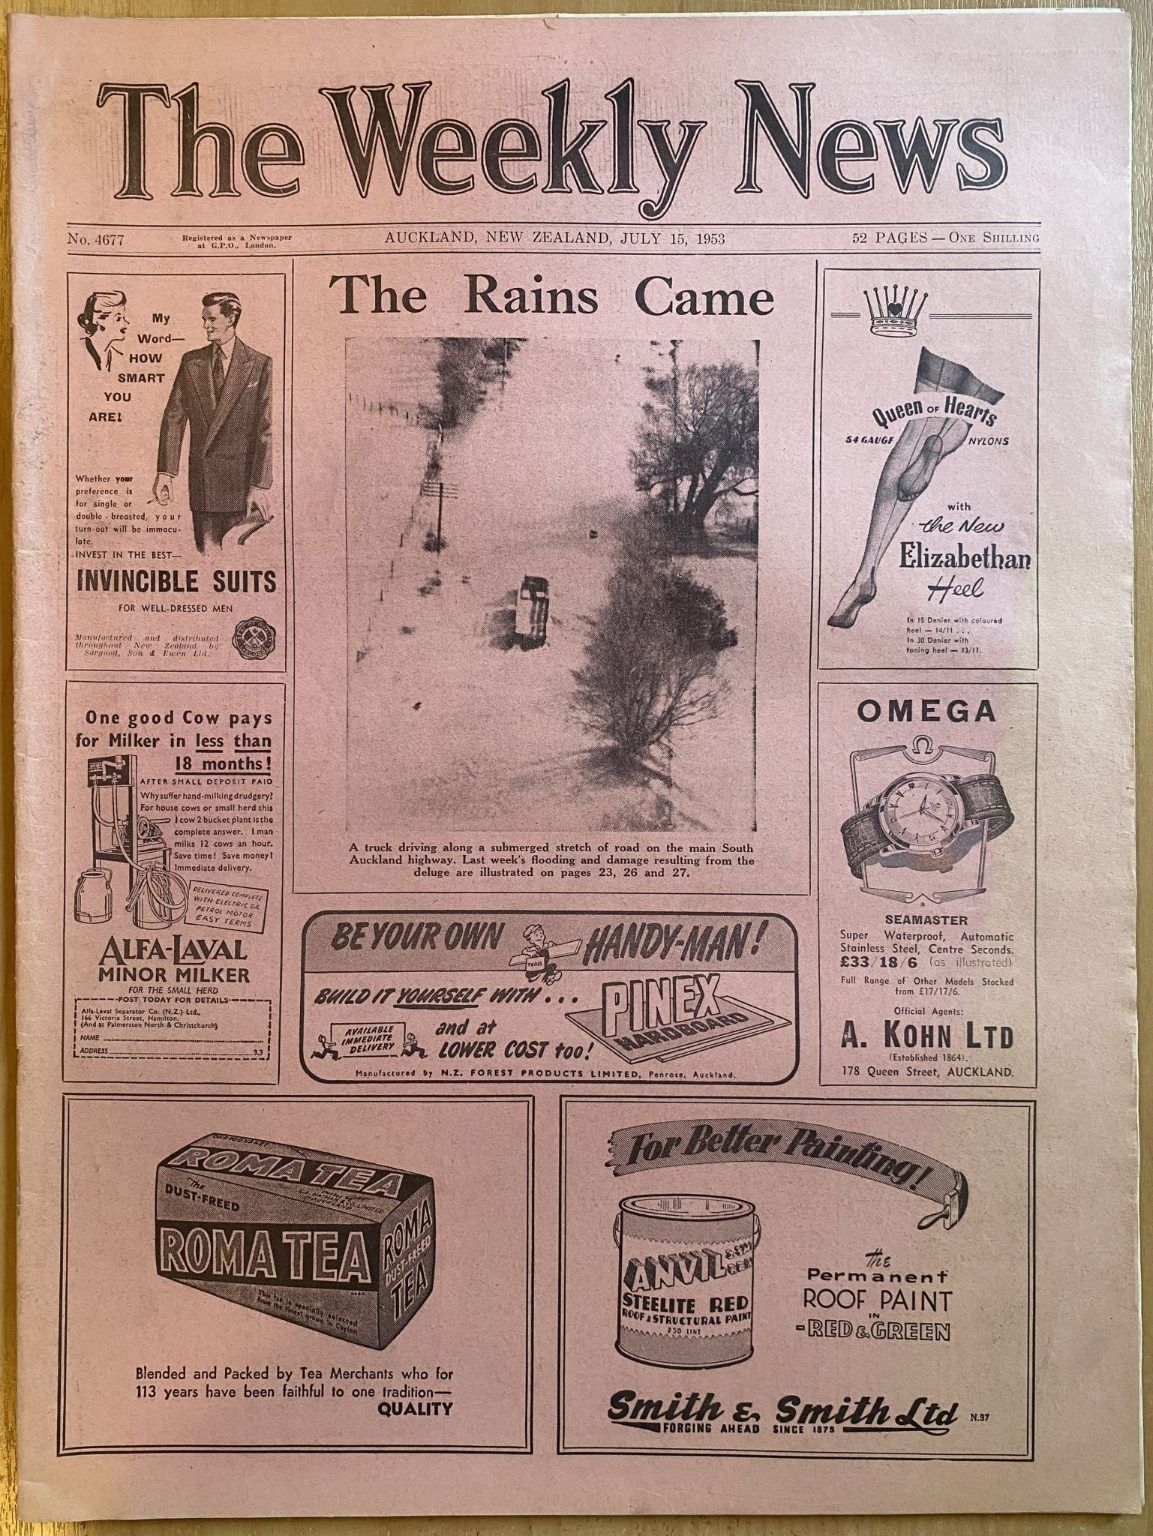 OLD NEWSPAPER: The Weekly News - No. 4677, 15 July 1953